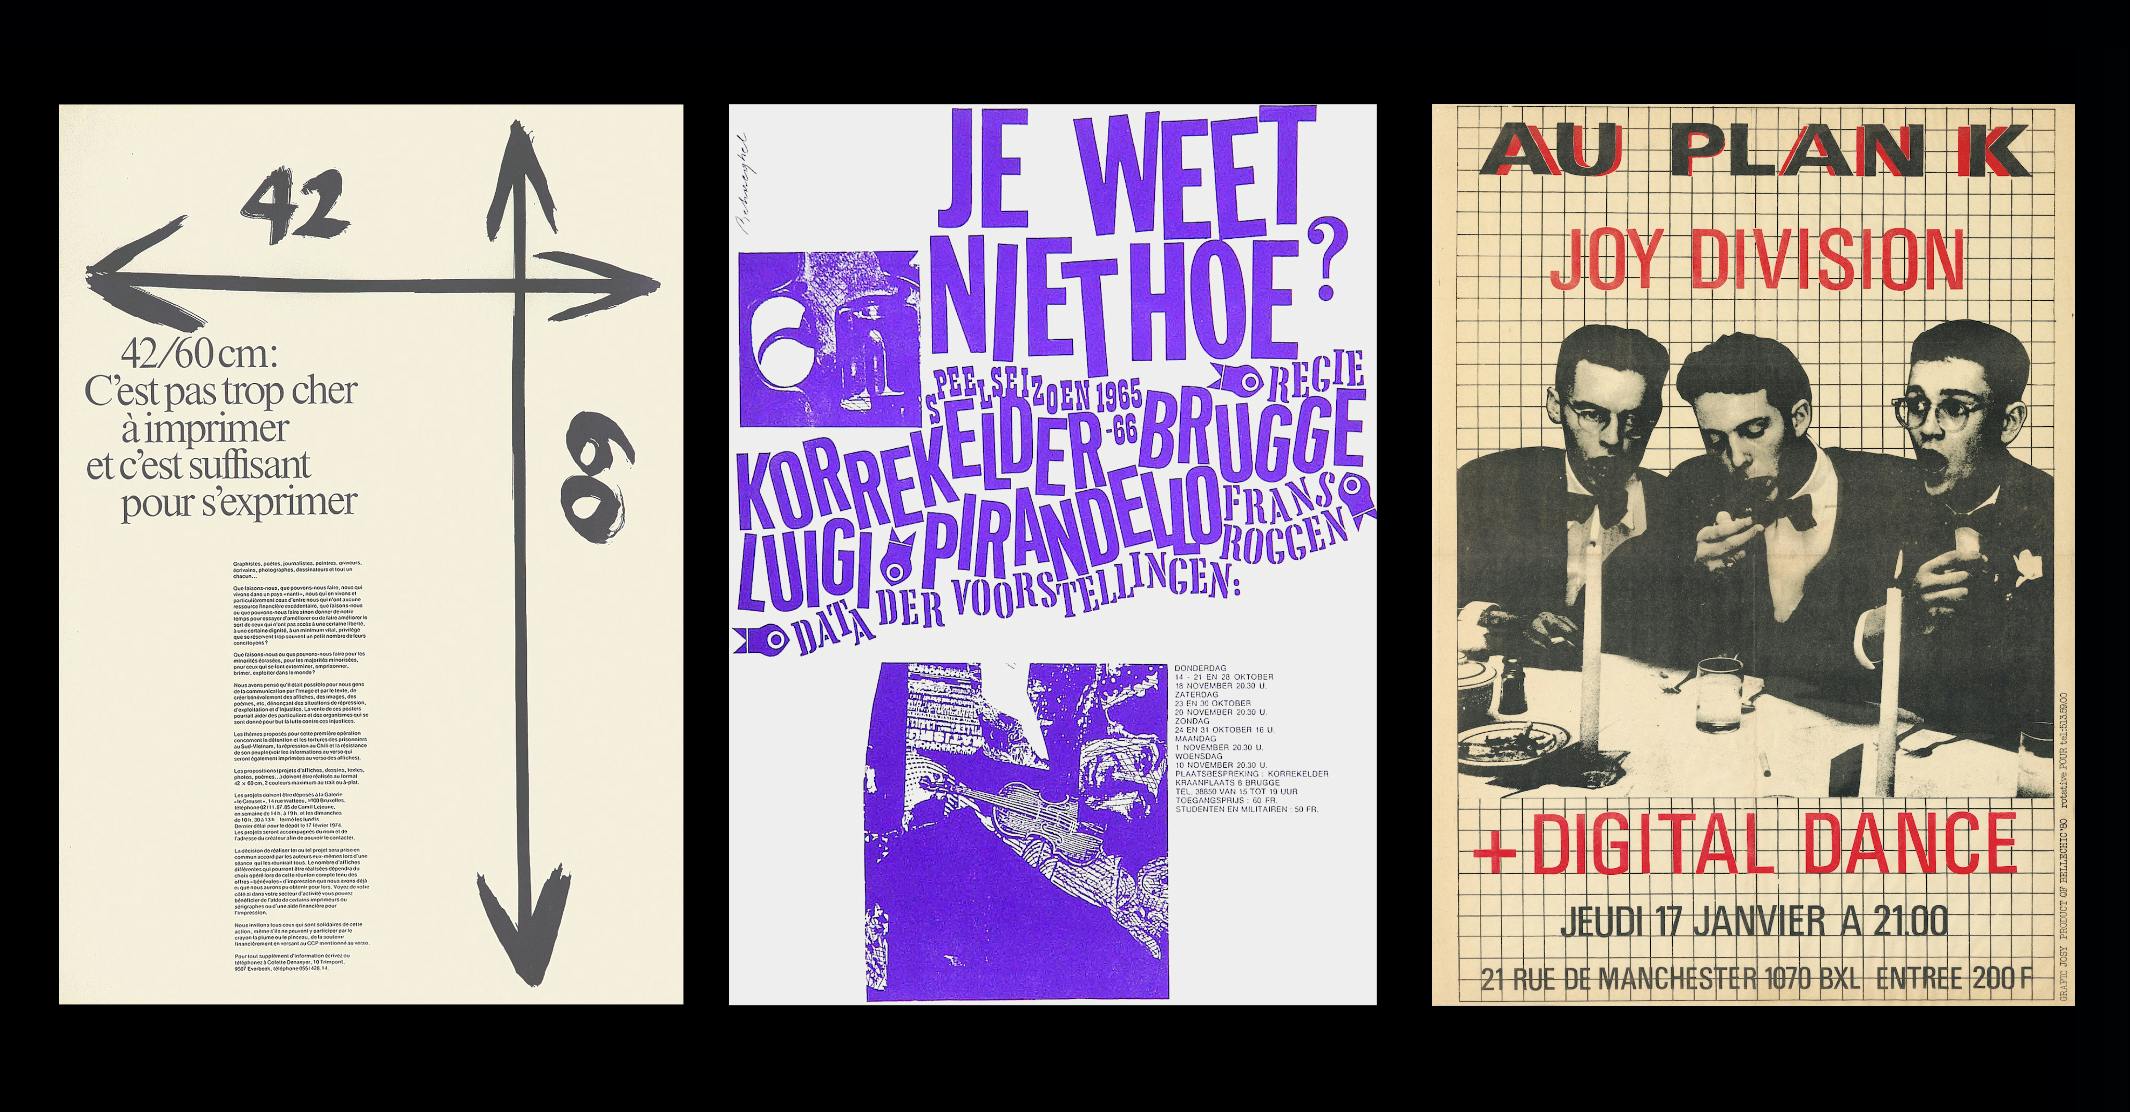 The lesser-told histories of Belgian graphic design